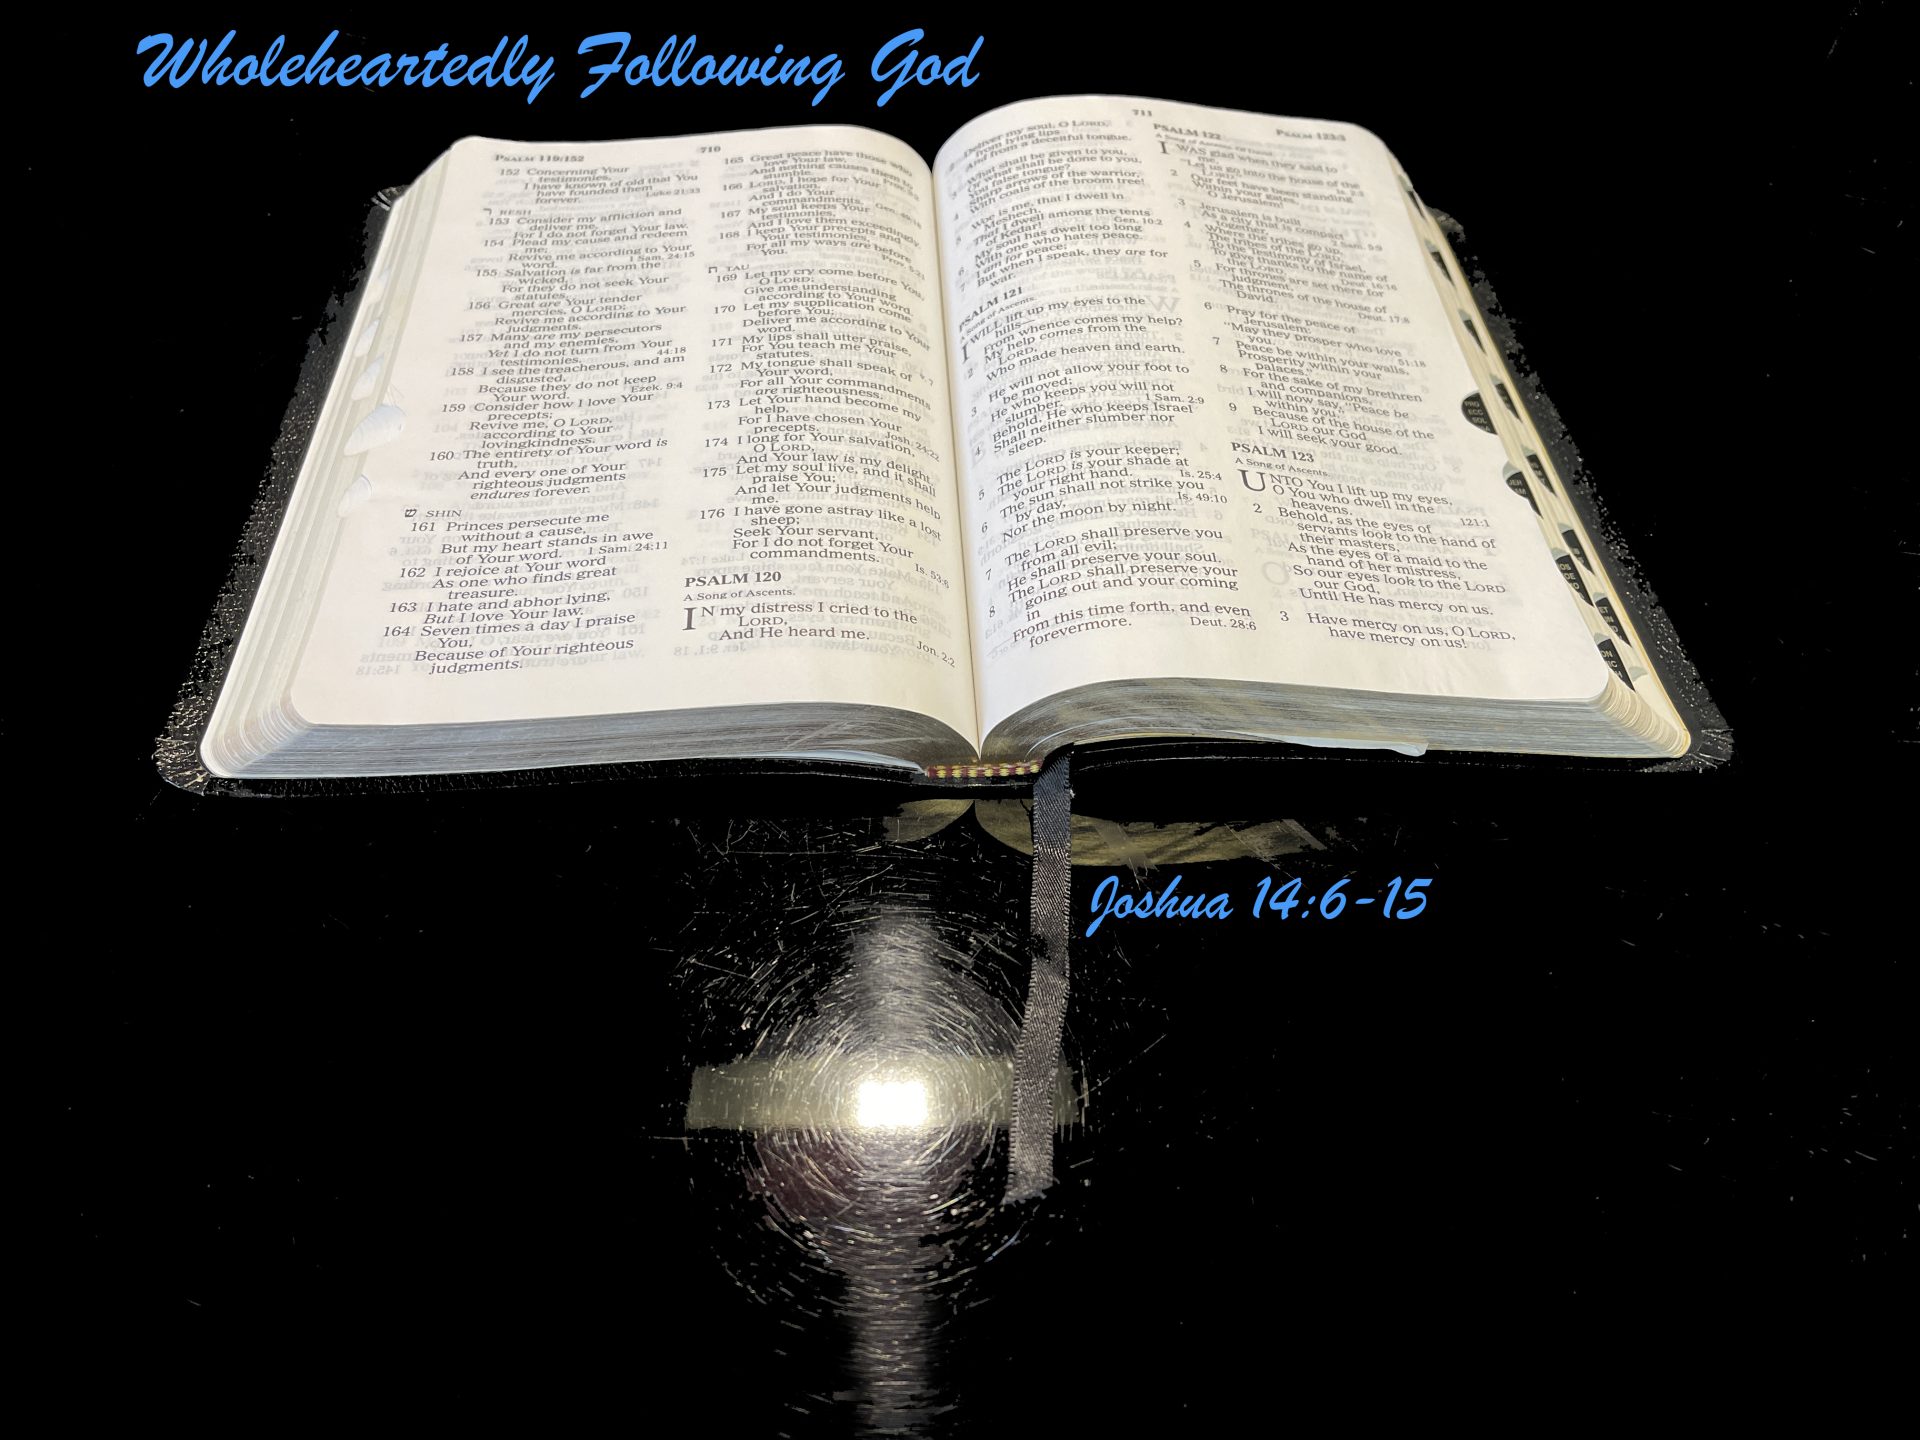 Wholeheartedly Following God